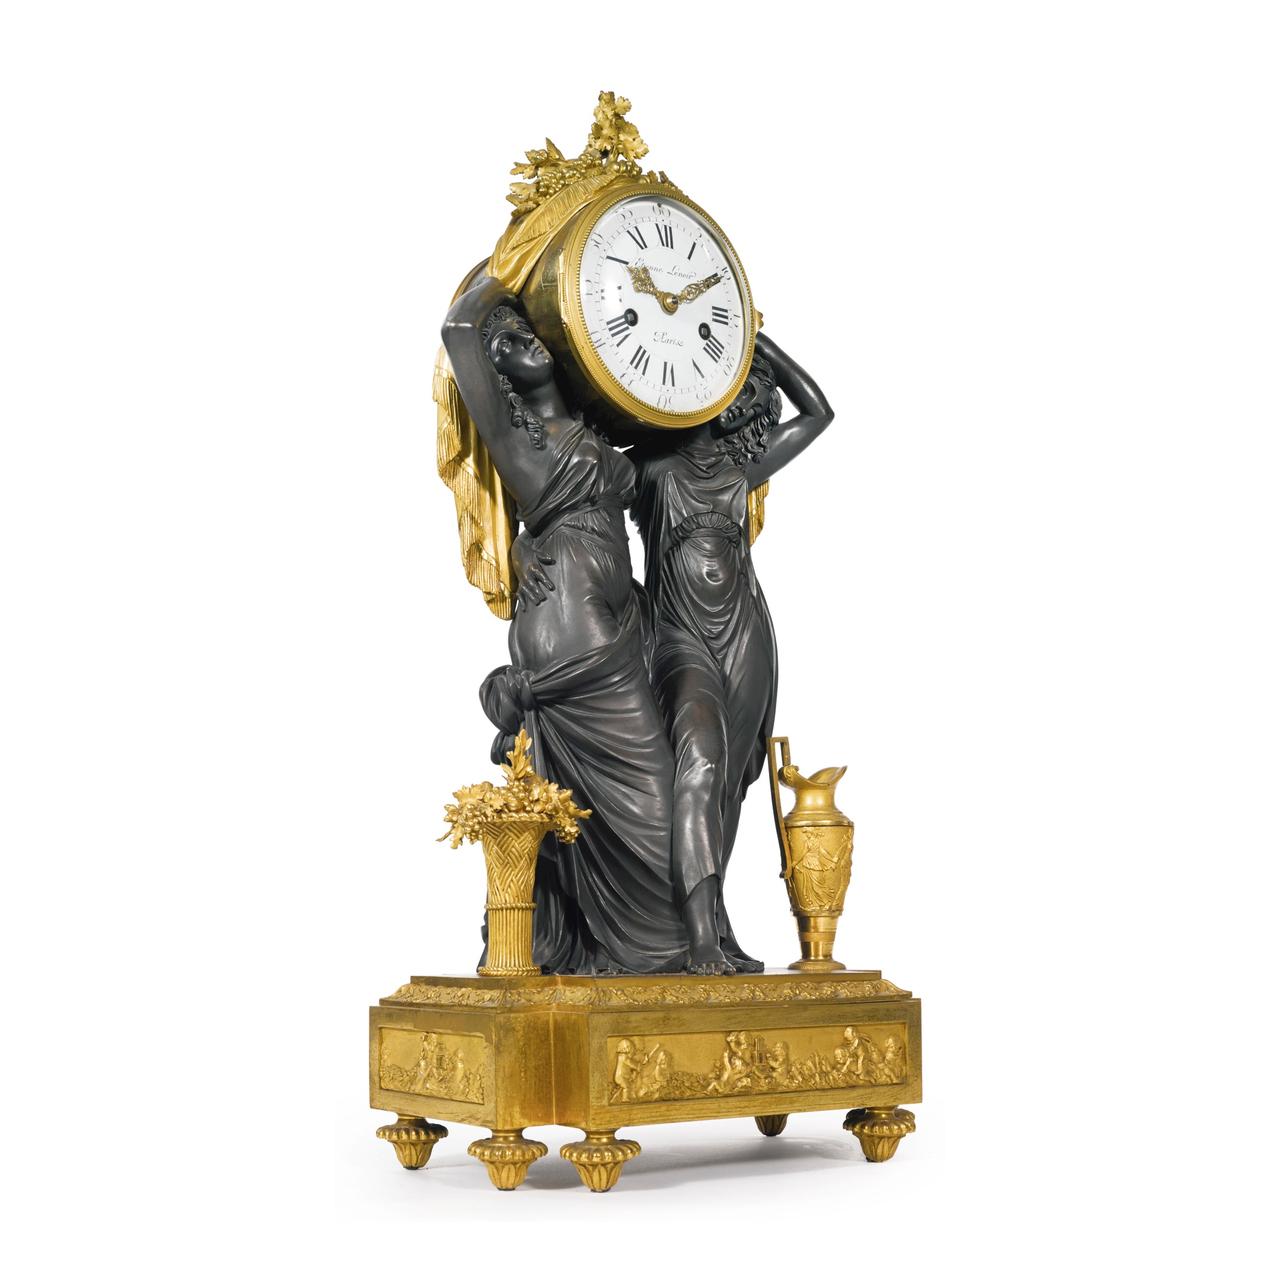 Very fine Louis XVI style gilt and patinated bronze mantel clock in the manner of Louis-Simon Boizot with Roman and Arabic numerals enamel dials; the twin train movement is inscribed Etienne Lenoir / LESIEUR and numbered 811

Maker: Étienne Le